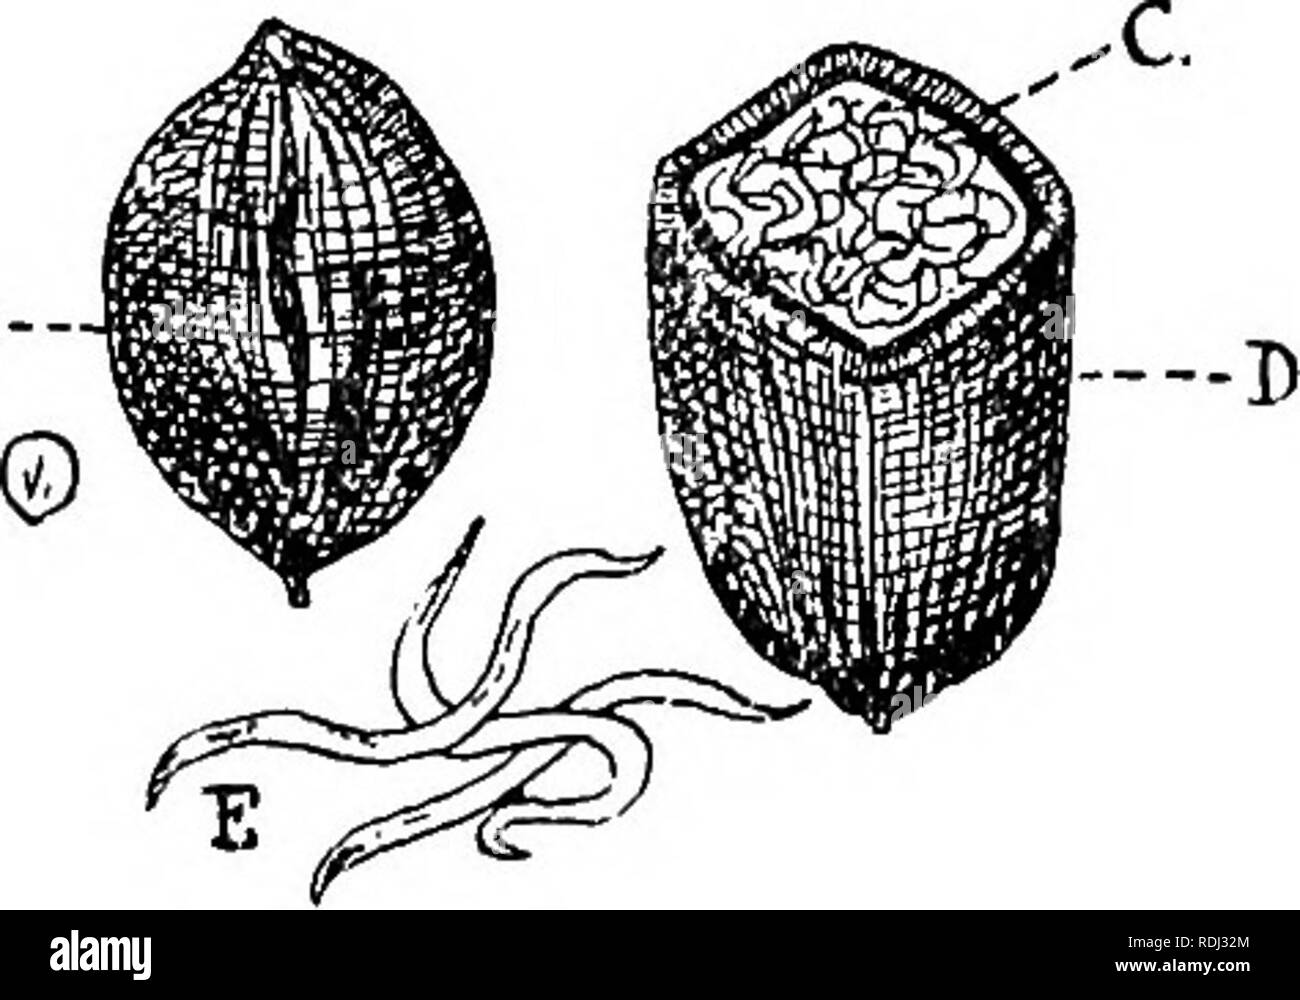 . A manual of elementary zoology . Zoology. THE NEMATODA. PARASITISM 3°3 and live in the body cavity till they become adult, when they escape into damp earth, become sexually mature, and pair. After rain the adults sometimes climb the stems of plants in such numbers as to give rise to the legend of &quot; showers of worms.&quot;. Fig. 211.—The Corn-cockle Worm.—From Theobald. A, Cockle gall; C, larvae; in D, gall cut open ; E, larvae magnified. 5. Larva and adults parasitic in different animals, with a free stage. —The Guinea Worm, Dracunculus medinensis. The female, about 90 cm. long, encysts Stock Photo